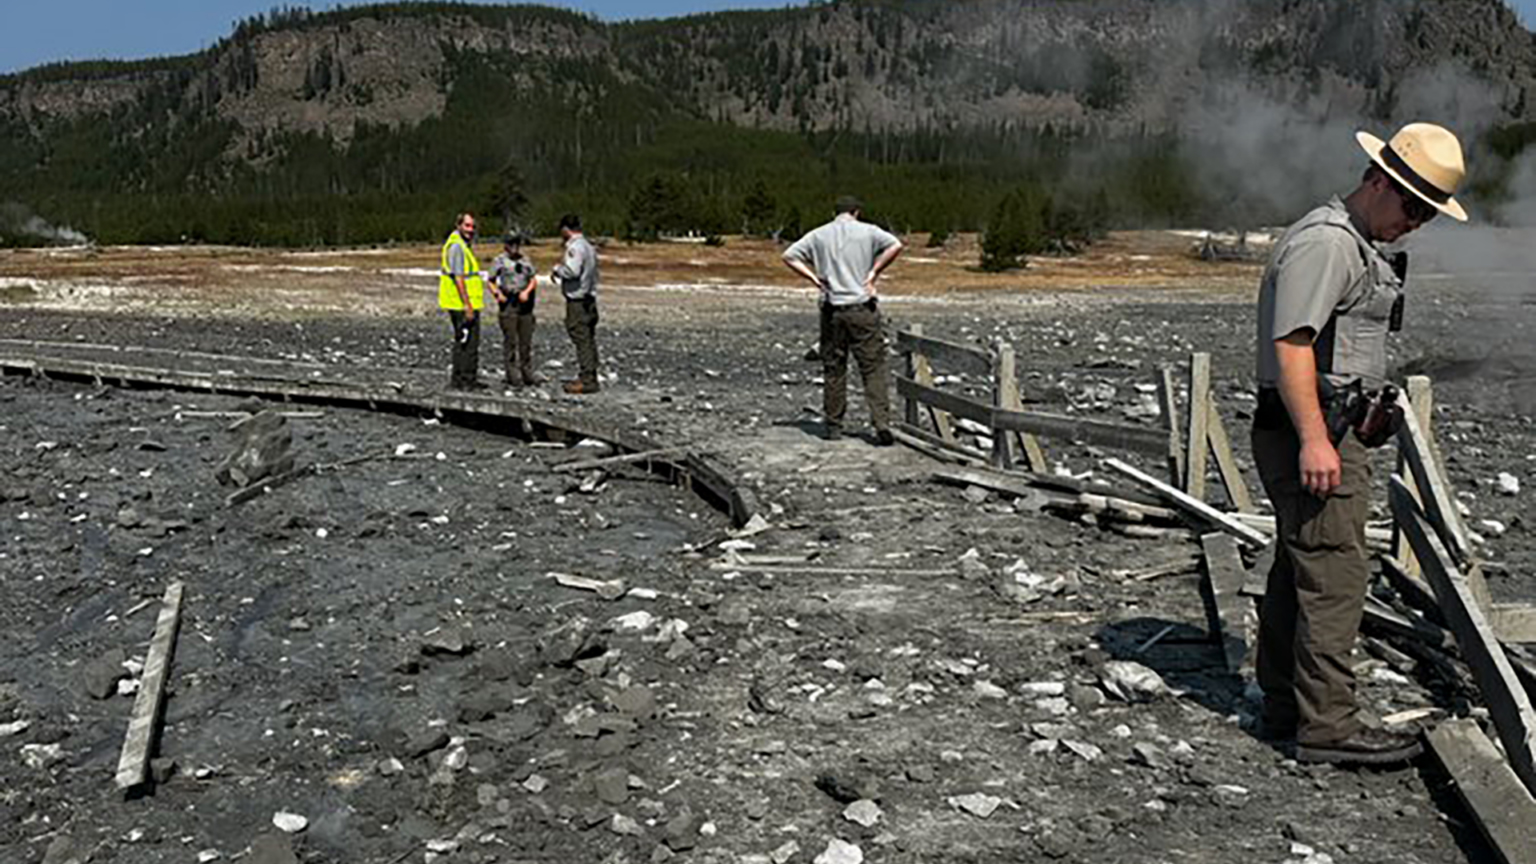 ellowstone National Park officials survey damage near Biscuit Basin from a hydrothermal explosion